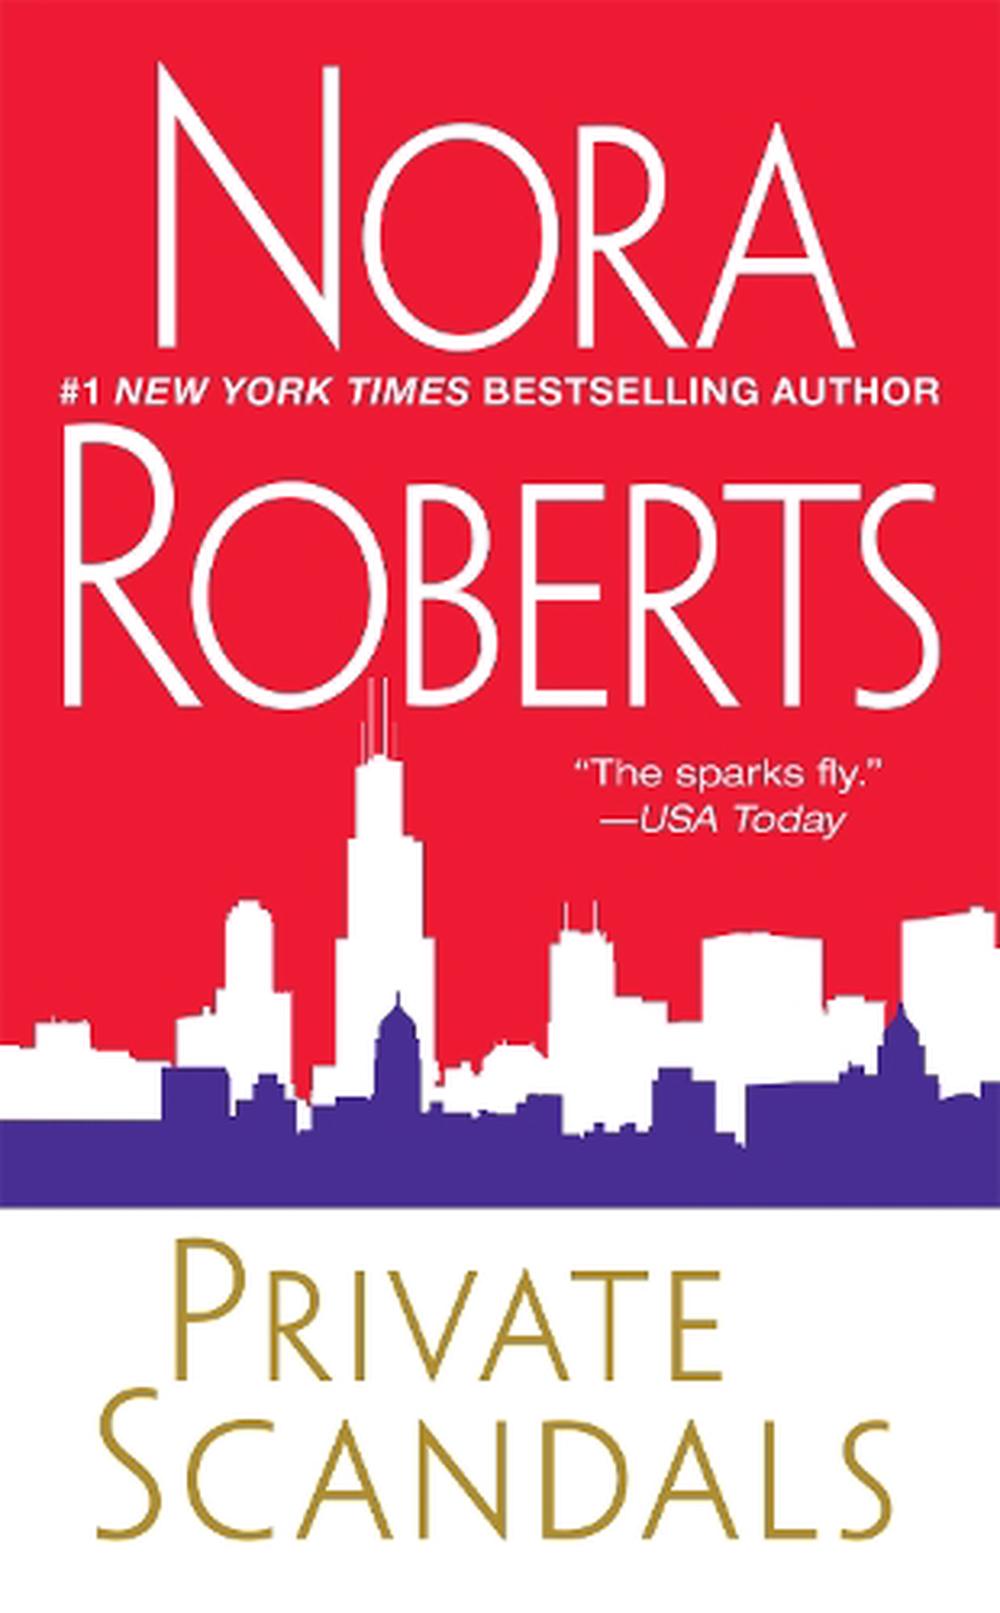 Private Scandals By Nora Roberts English Mass Market Paperback Book Free Shipp 9780515152975 4870